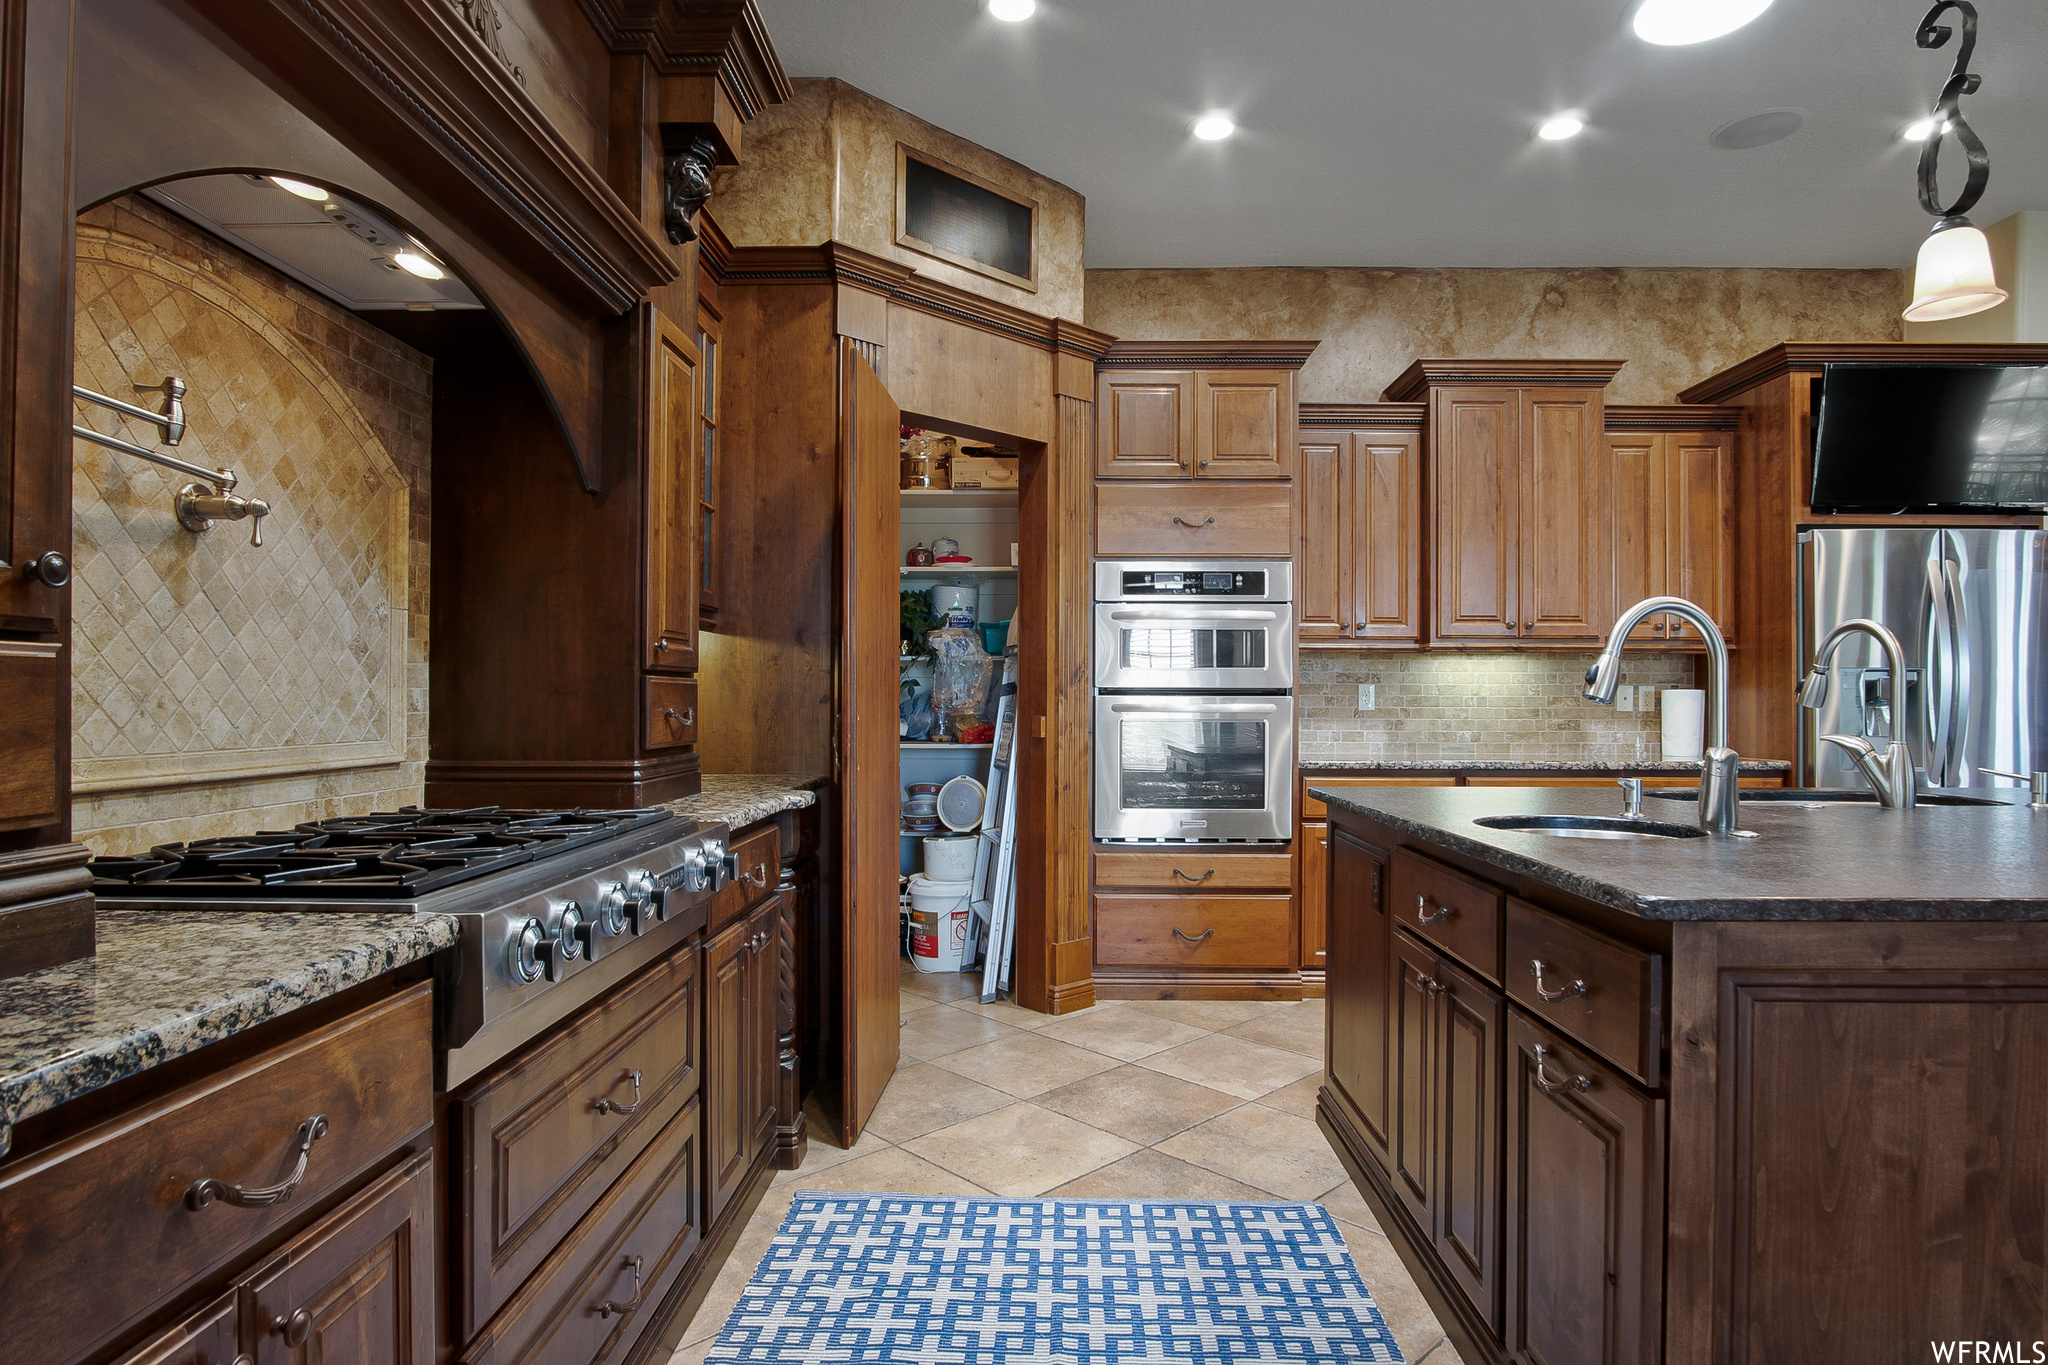 Kitchen featuring stainless steel refrigerator, TV, gas cooktop, double oven, light tile floors, granite-like countertops, dark brown cabinetry, and kitchen island sink